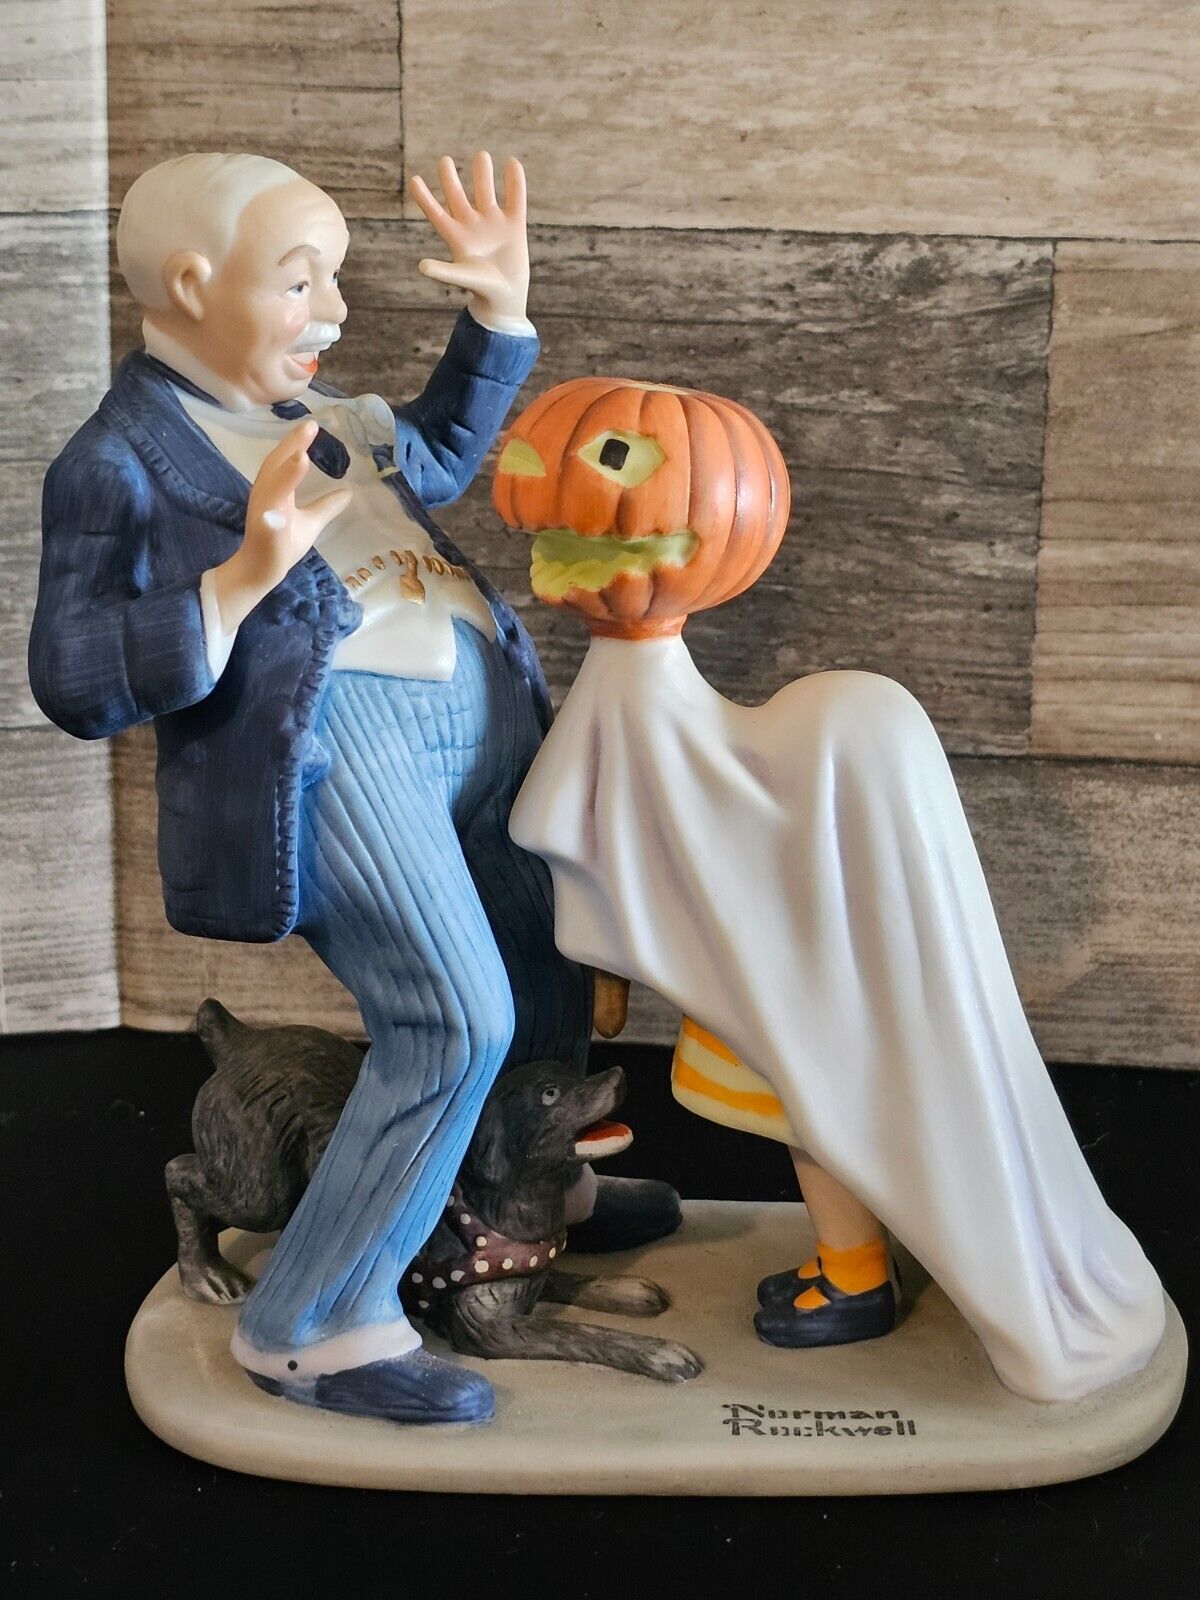 Primary image for Norman Rockwell Porcelain Halloween Figurine "Trick or Treat" Danbury Mint 1980 